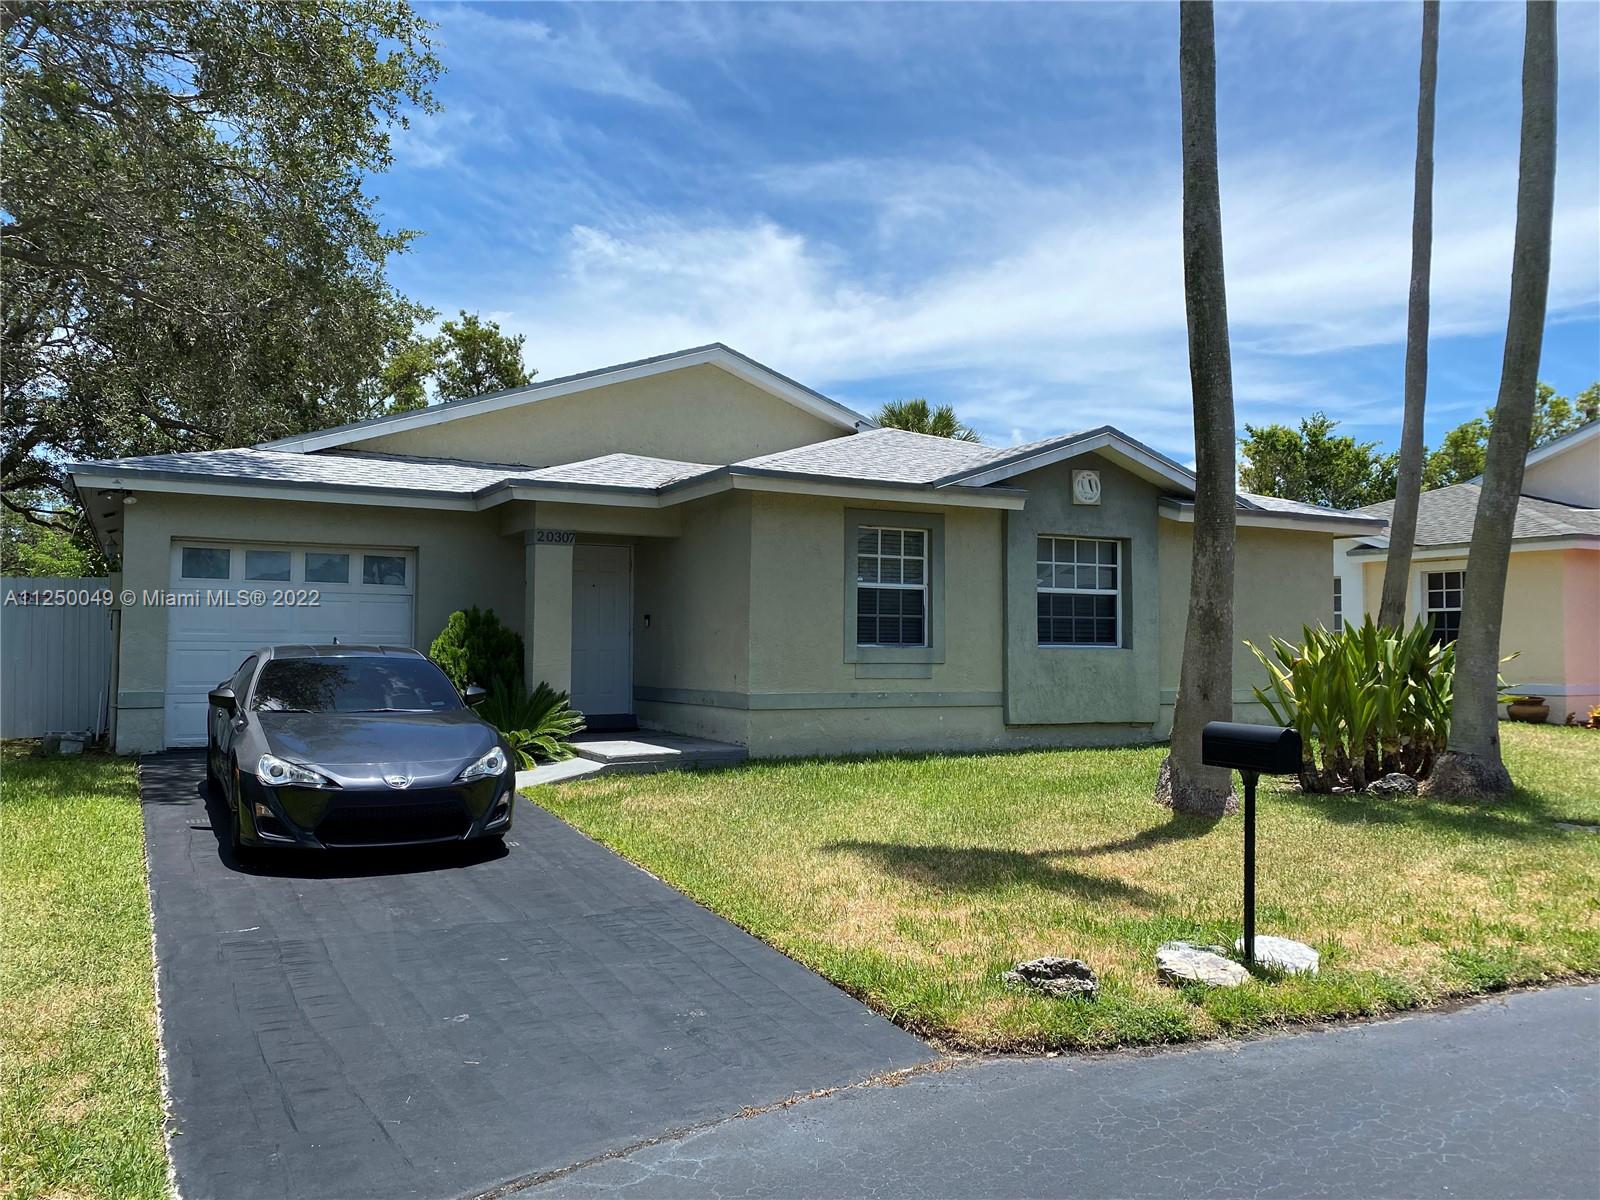 Updated single family home in the gated Sea Grape community in Cutler Bay. Open floor plan with lots of natural light! Have your dogs enjoy the large fenced in back yard. Centrally located near great schools, shopping, restaurants, Black Point marina and access to the turnpike.